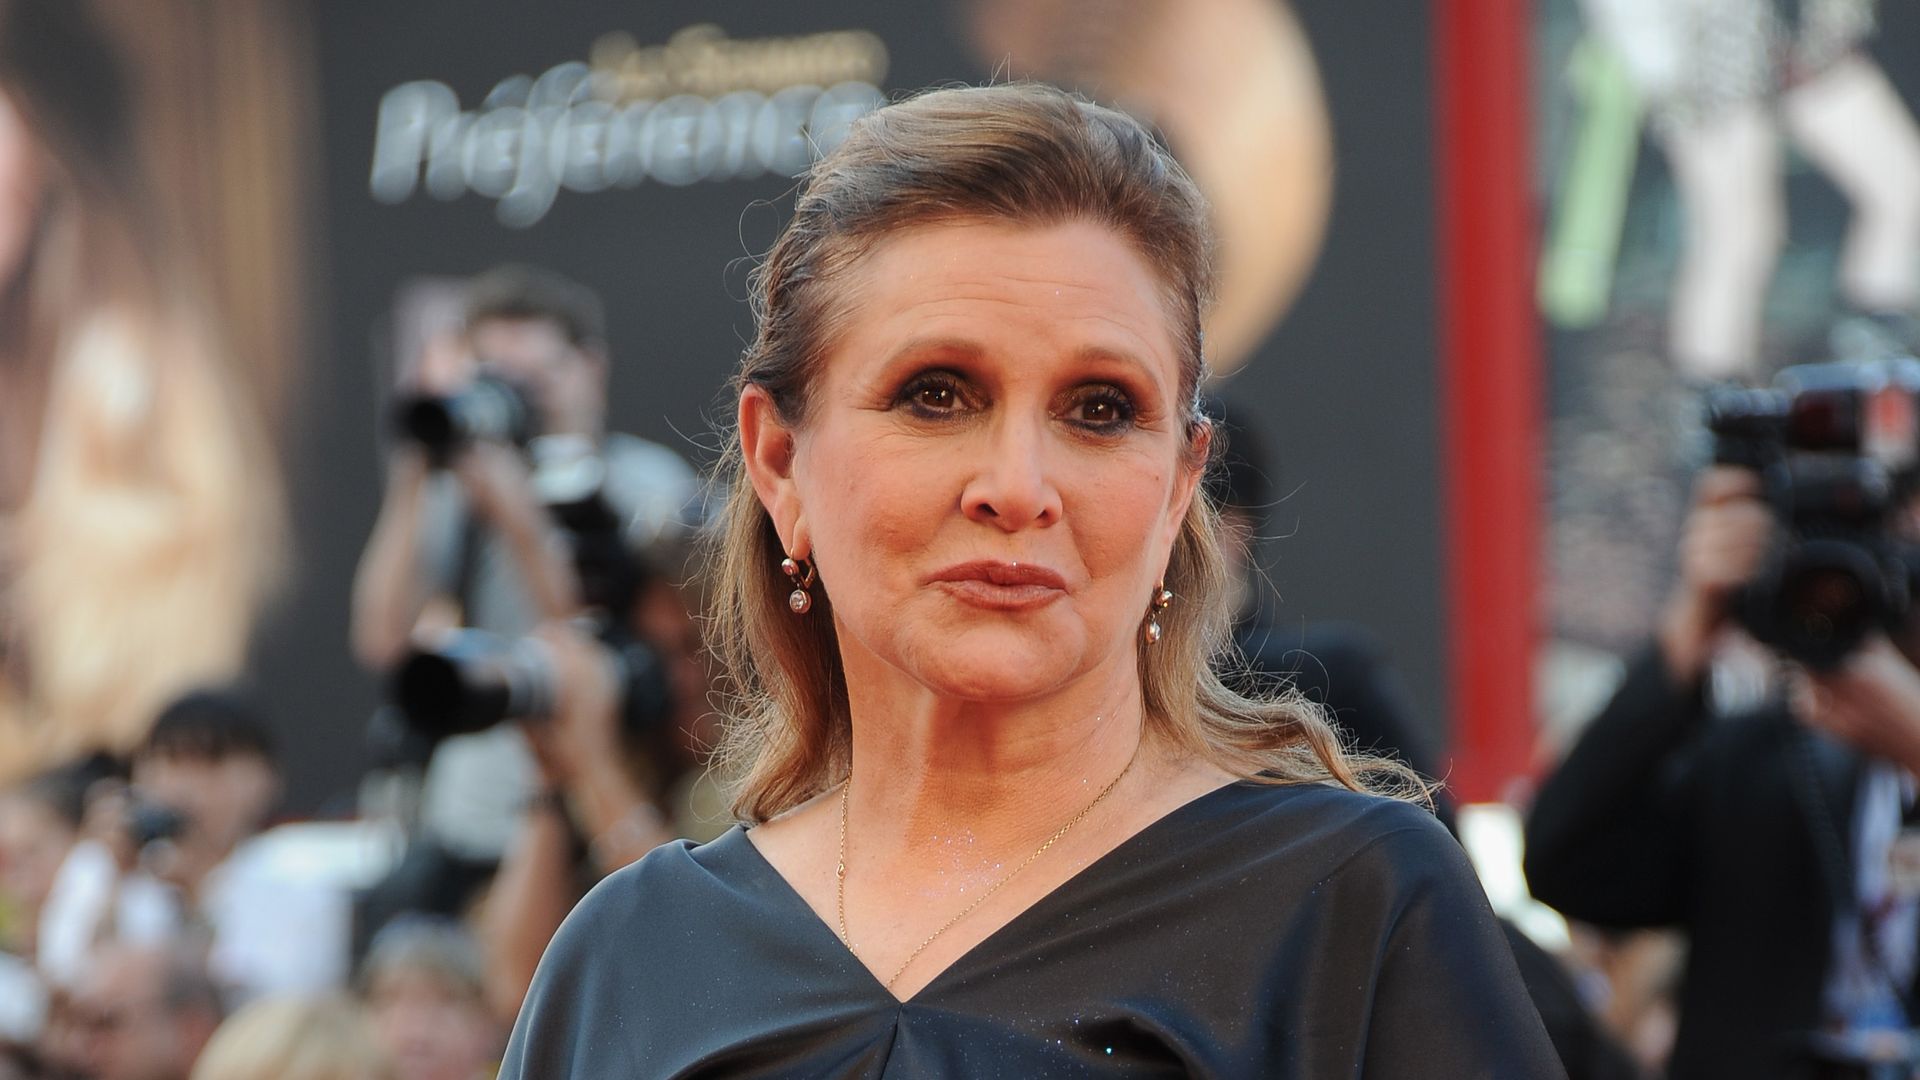 Carrie Fisher attends 'Gravity' premiere and Opening Ceremony during The 70th Venice International Film Festival at Sala Grande on August 28, 2013 in Venice, Italy